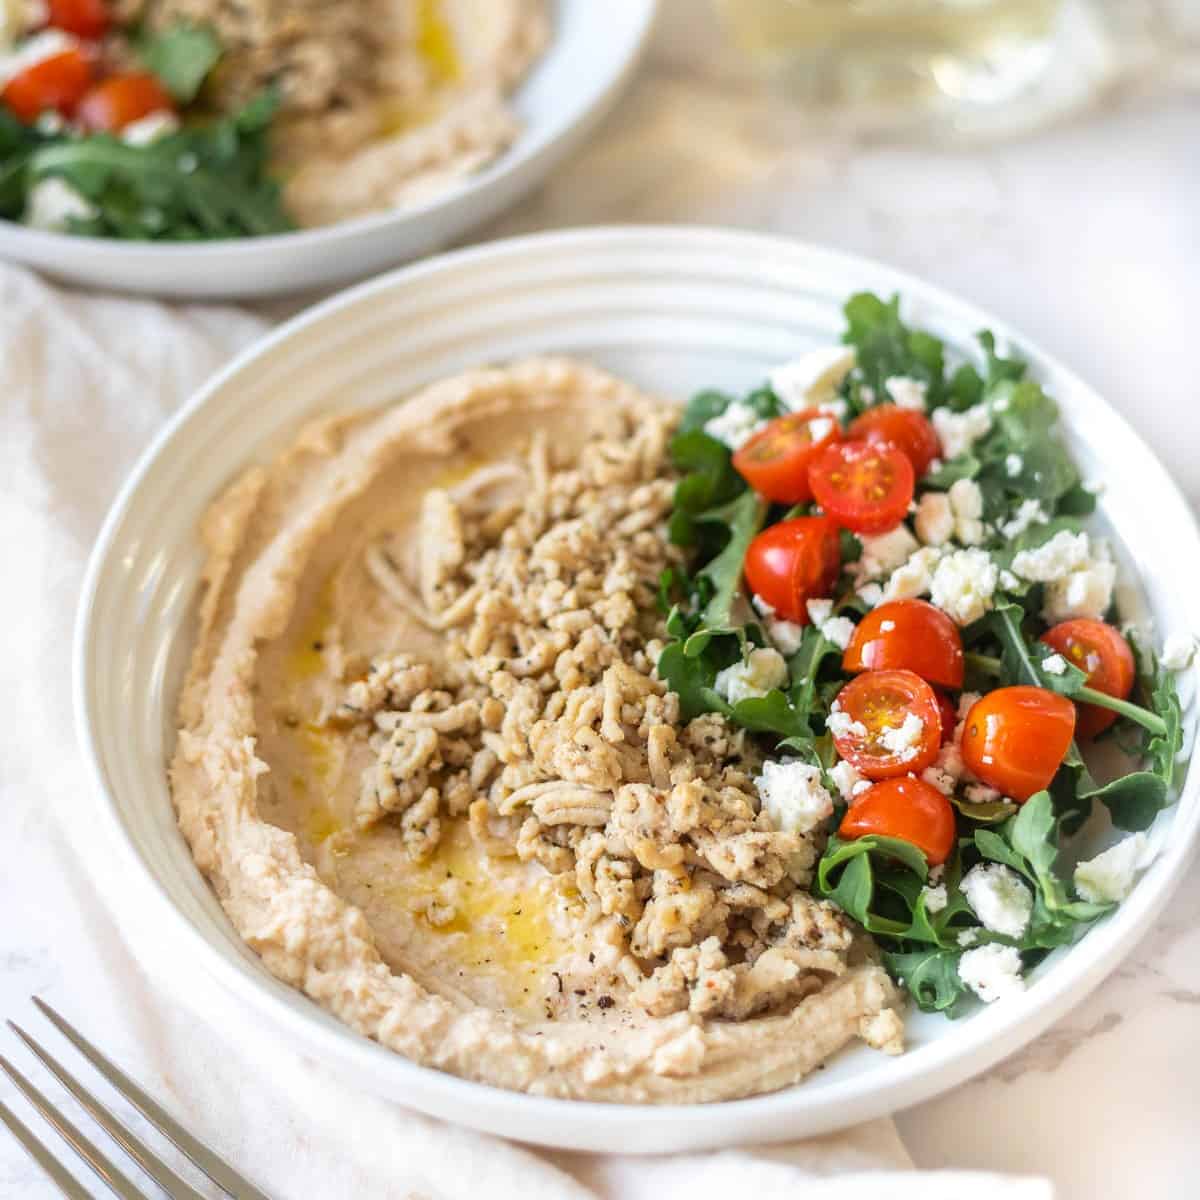 white bowl with white beans, ground chicken, arugula, feta and tomatoes with another plate and glass of white wine in the background